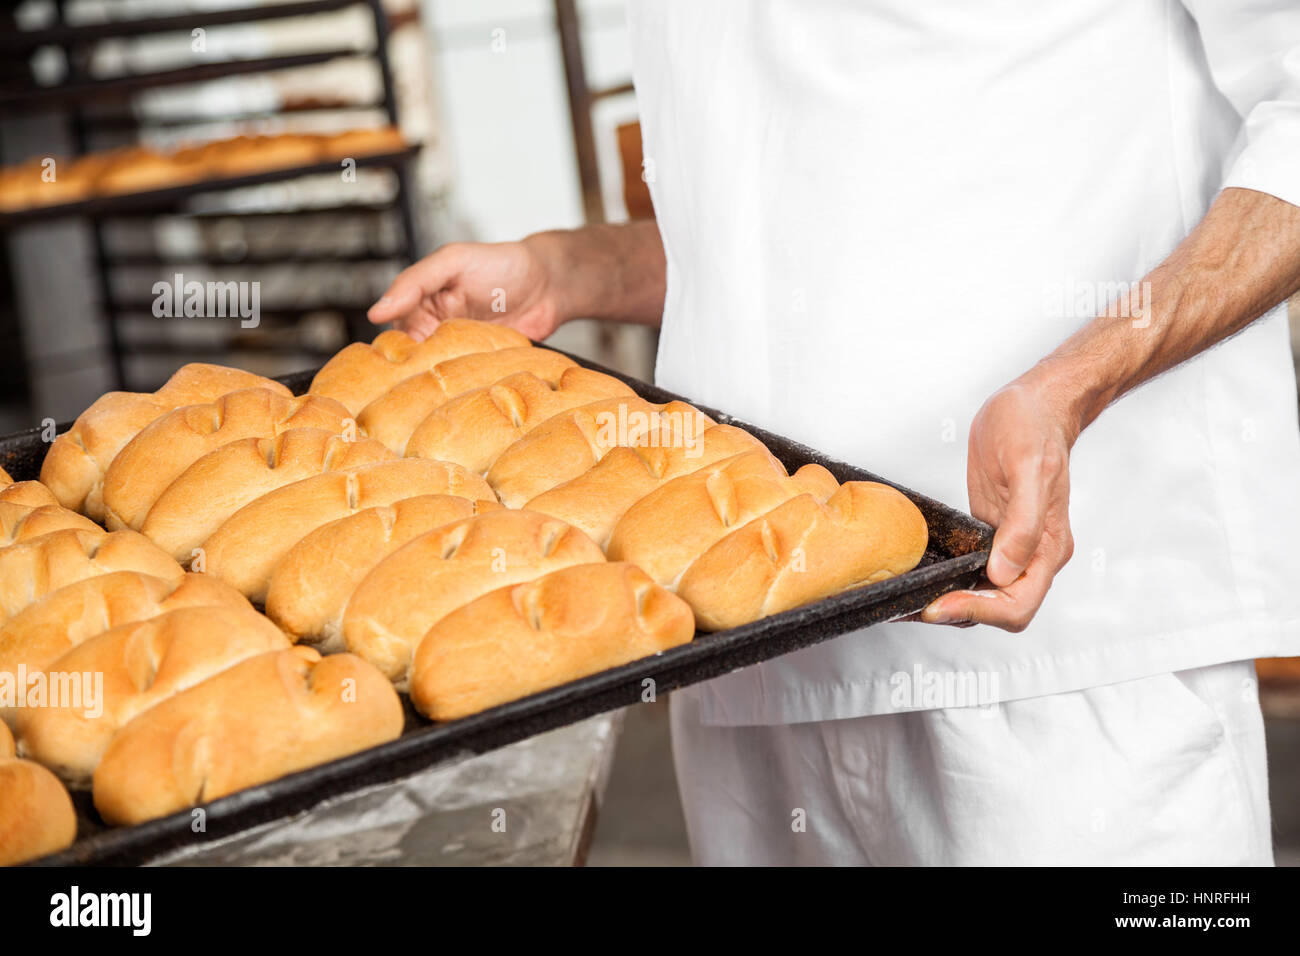 Midsection Of Baker Carrying Breads In Baking Tray Stock Photo